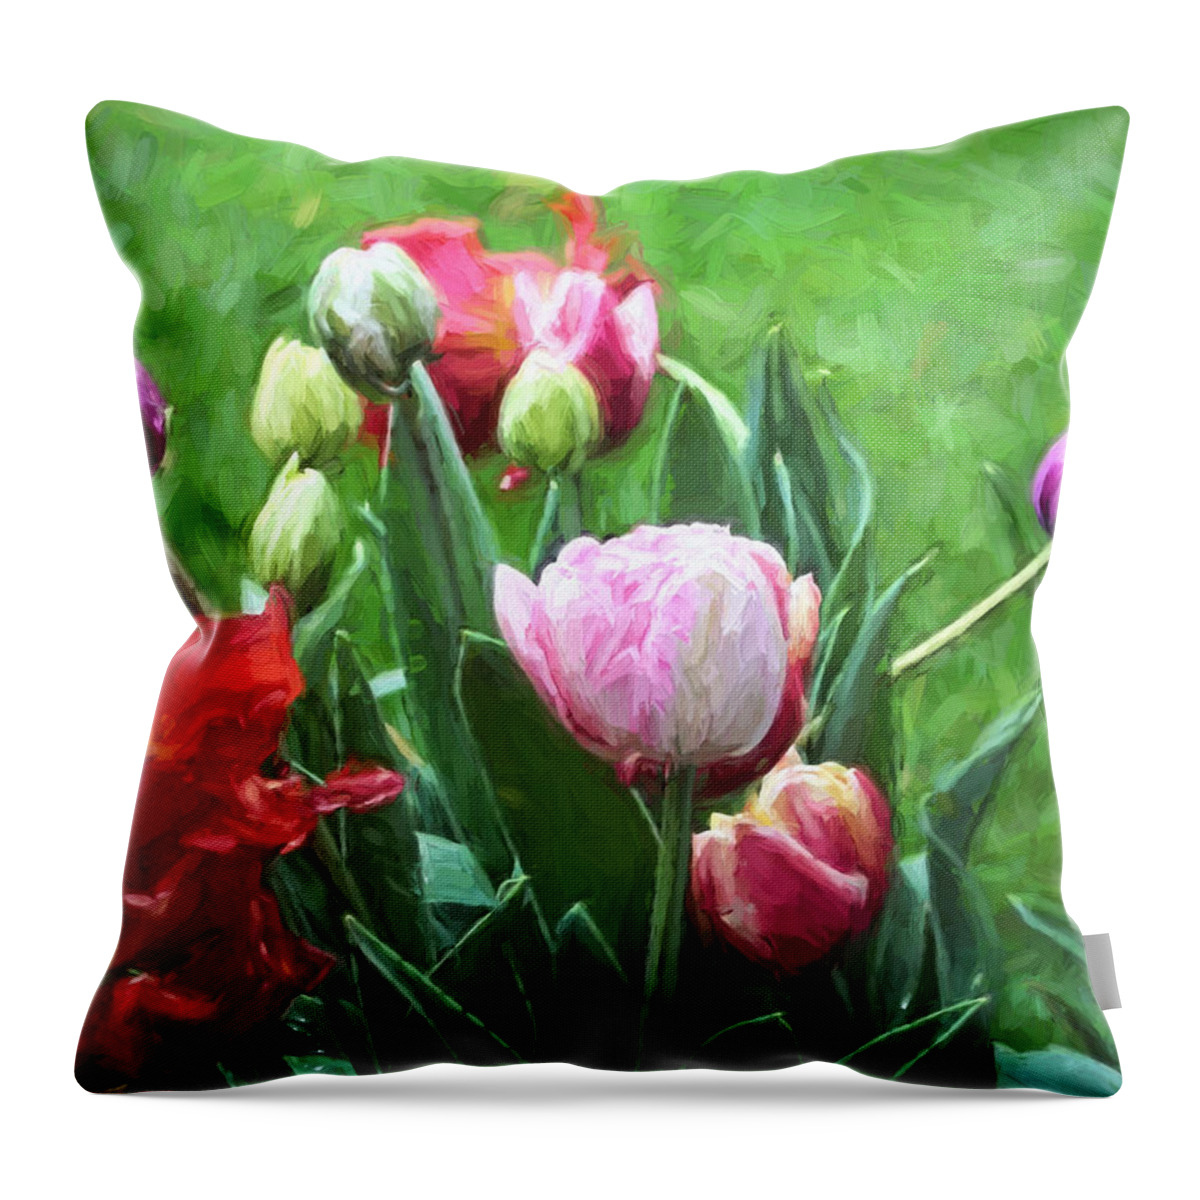 Floral Throw Pillow featuring the photograph Tulip 54 by Pamela Cooper